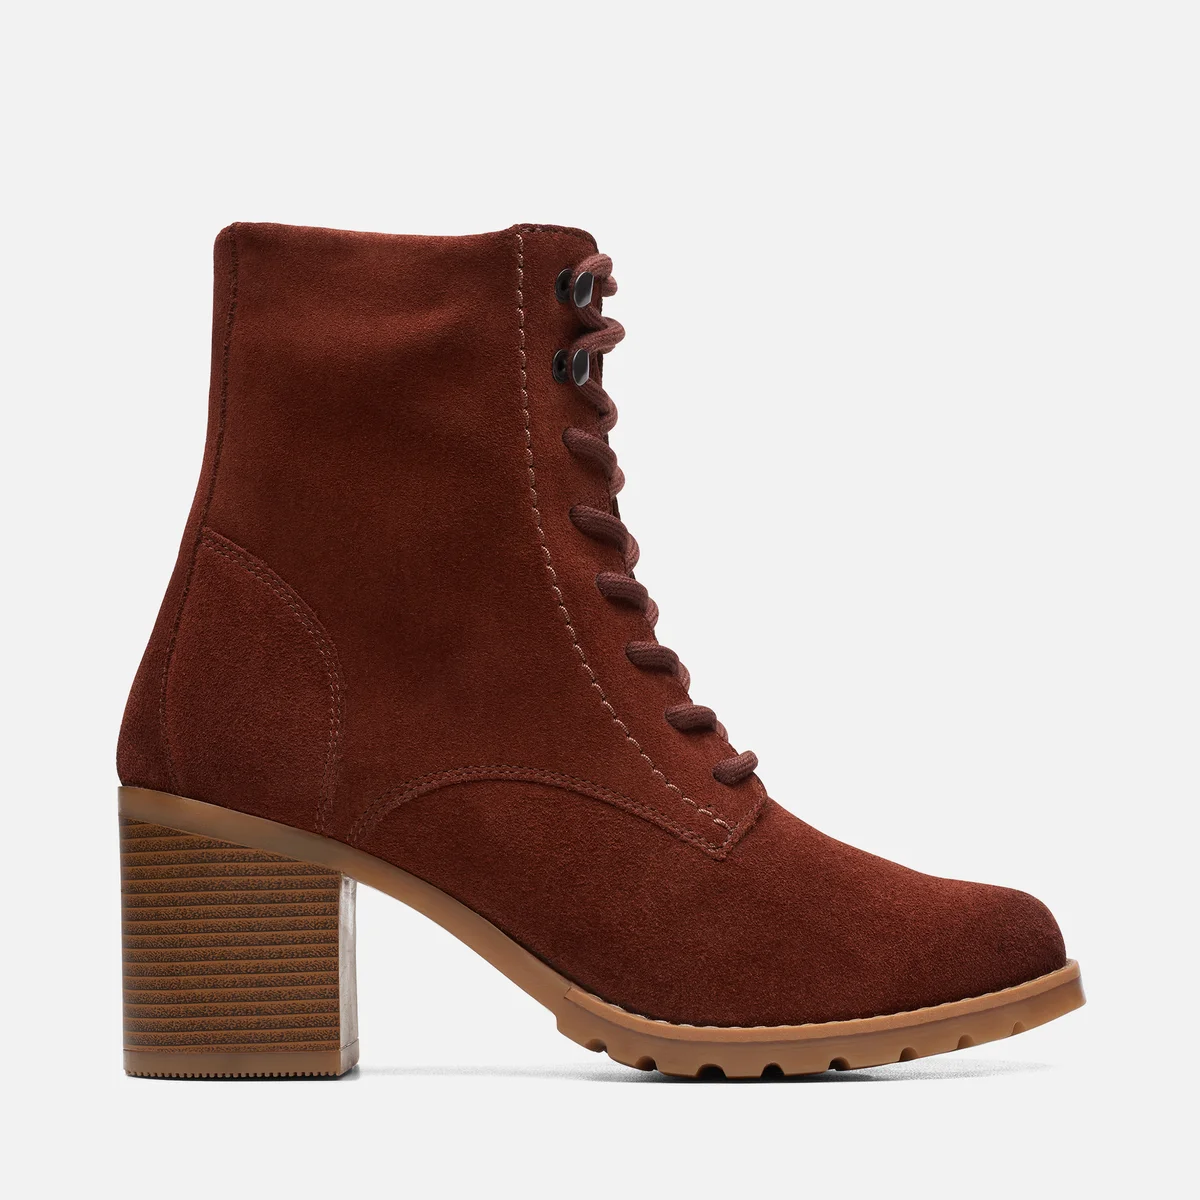 Clarks Clarkwell Suede Heeled Boots Image 1